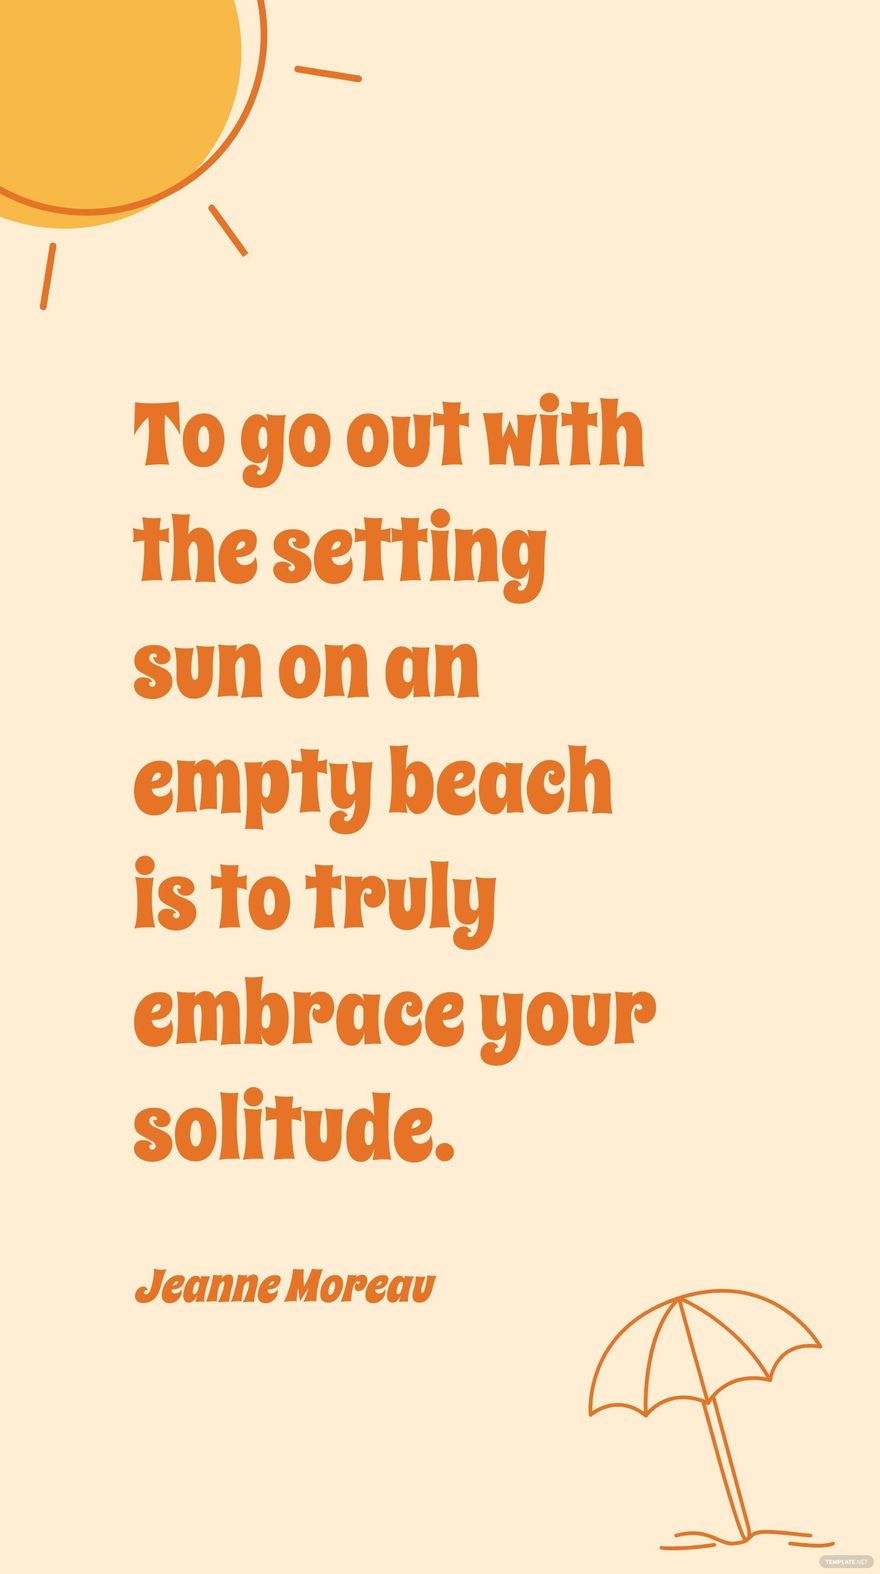 Jeanne Moreau - To go out with the setting sun on an empty beach is to truly embrace your solitude.